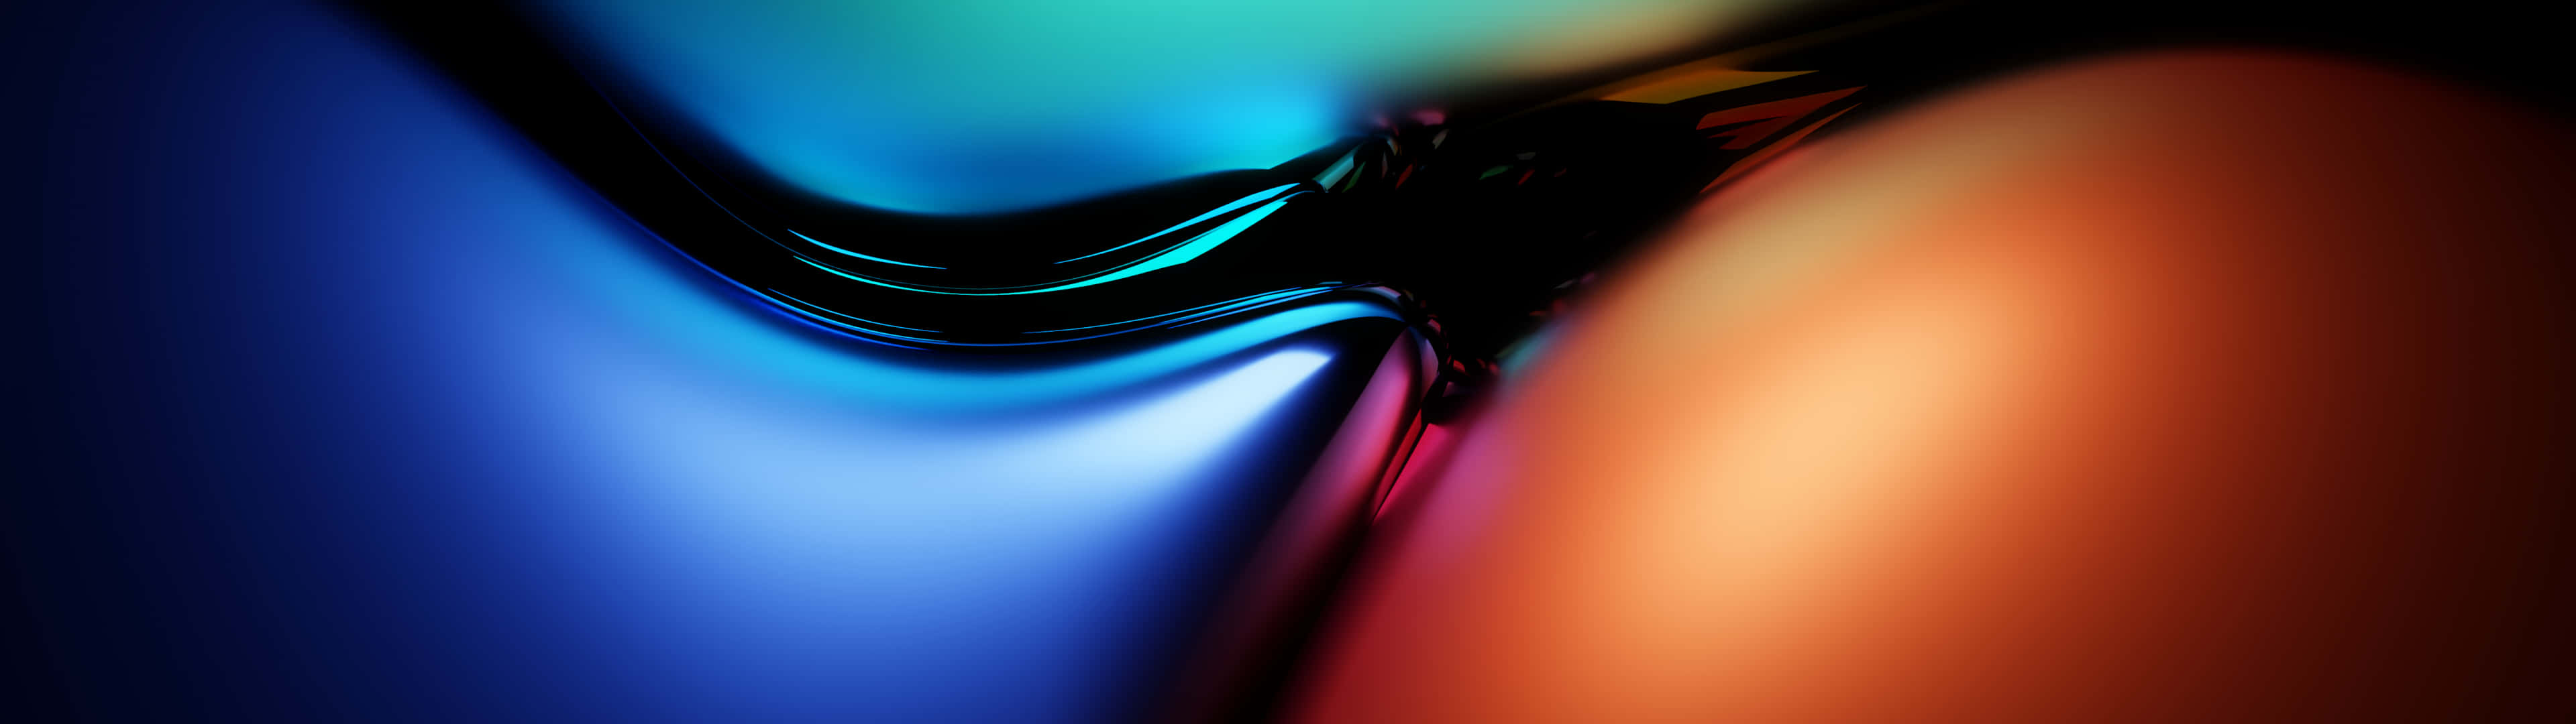 Fluid Abstract With Several Colors Wallpaper